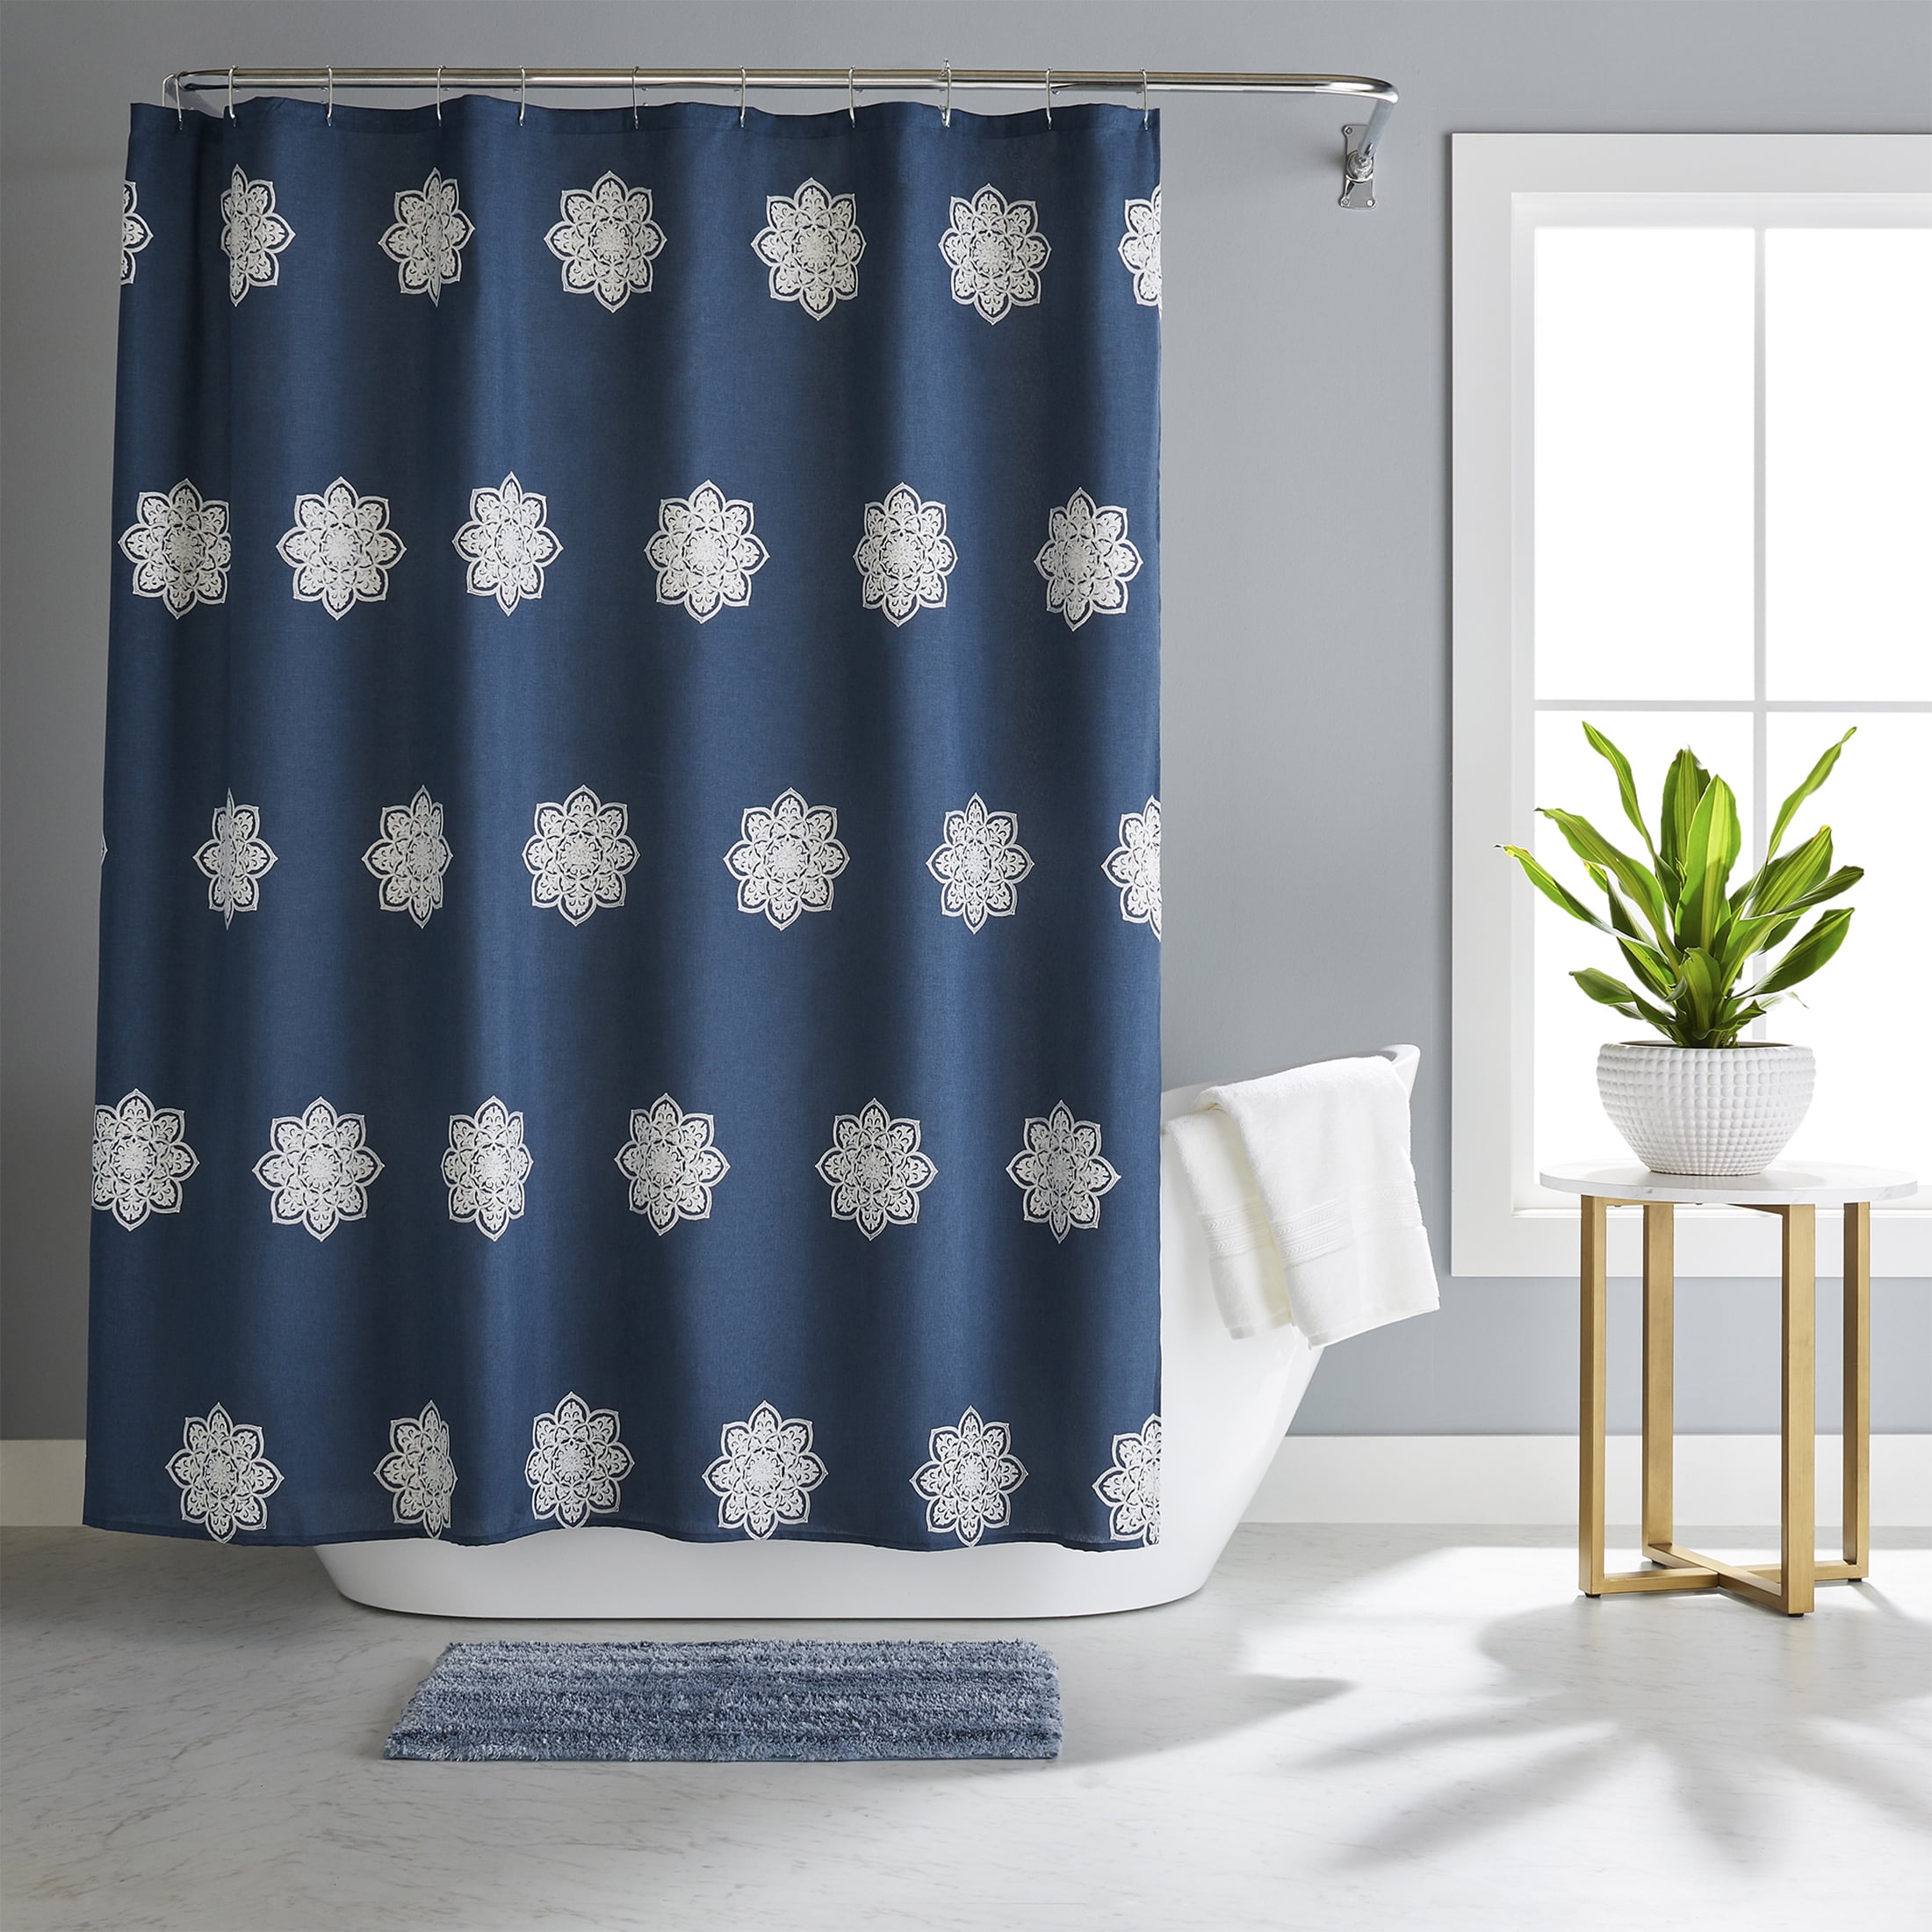 18 Piece Shower curtain set with Geometric design Made of 100%polyester Rowland 